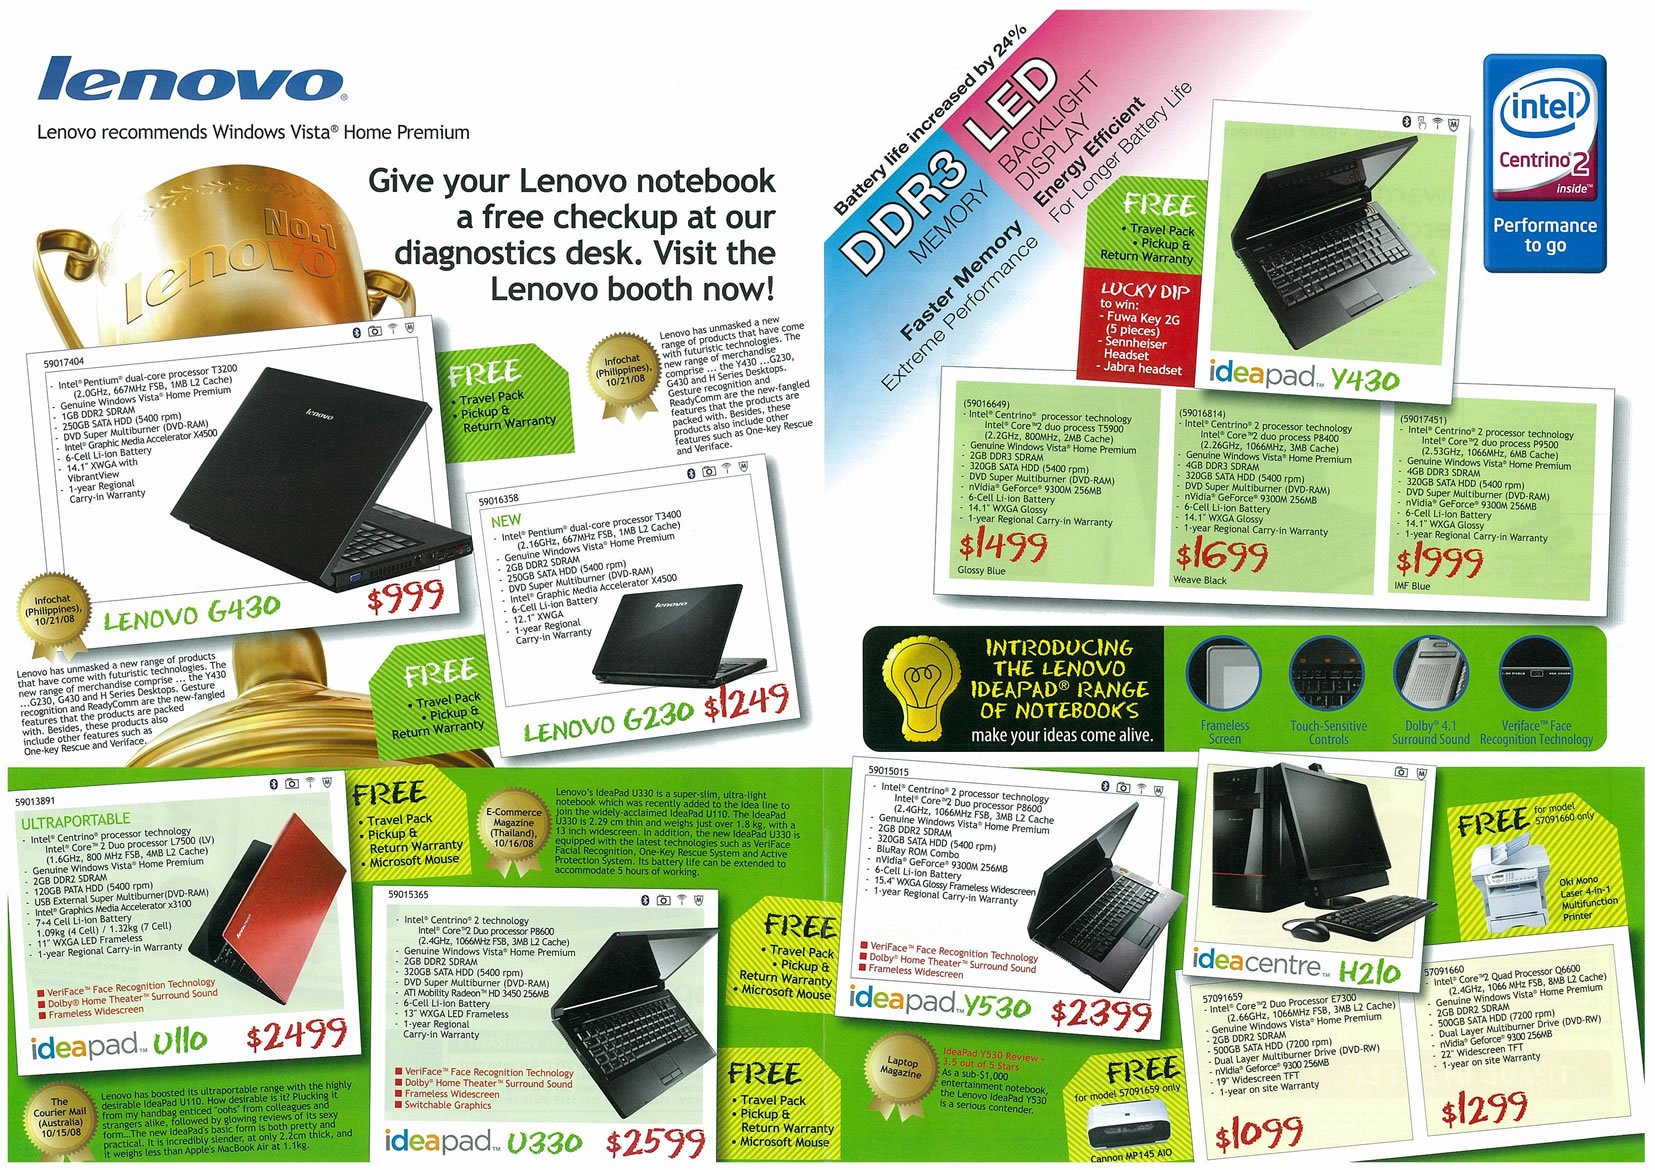 Sitex 2008 price list image brochure of Lenovo Notebooks Page 2 - Vr-zone Tclong